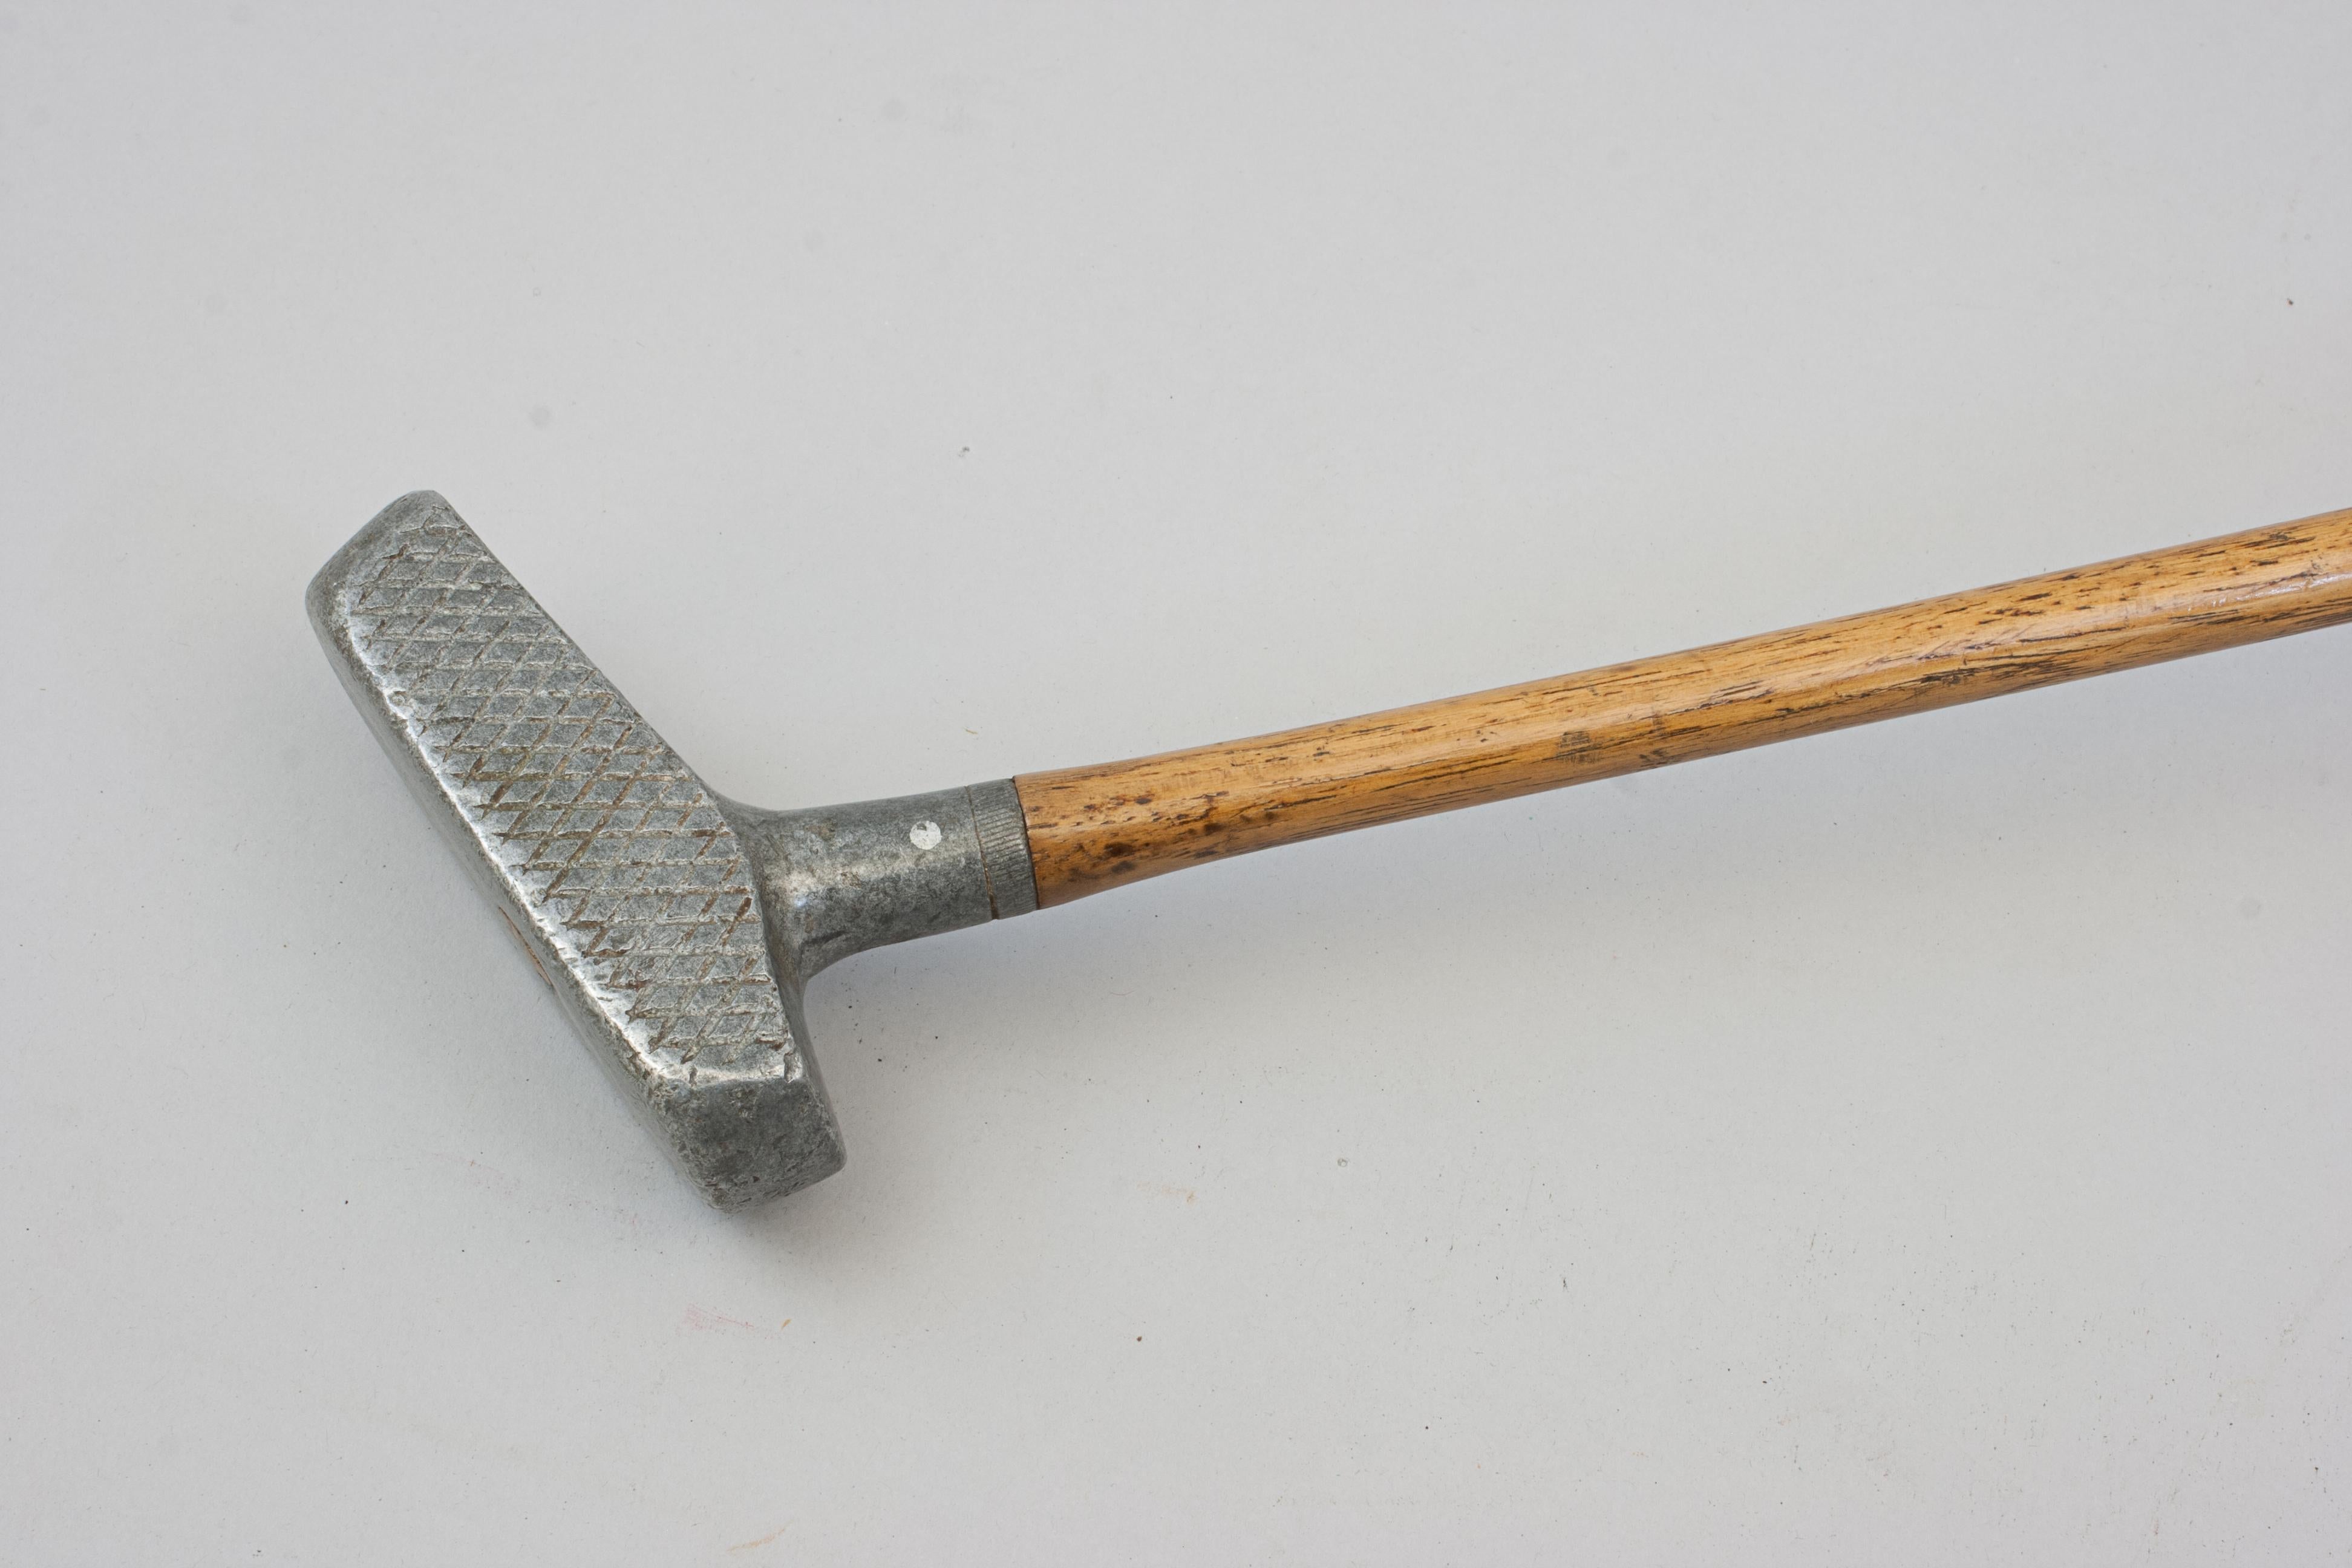 Early 20th Century Schenectady Putter, Center Shafted Alloy Head